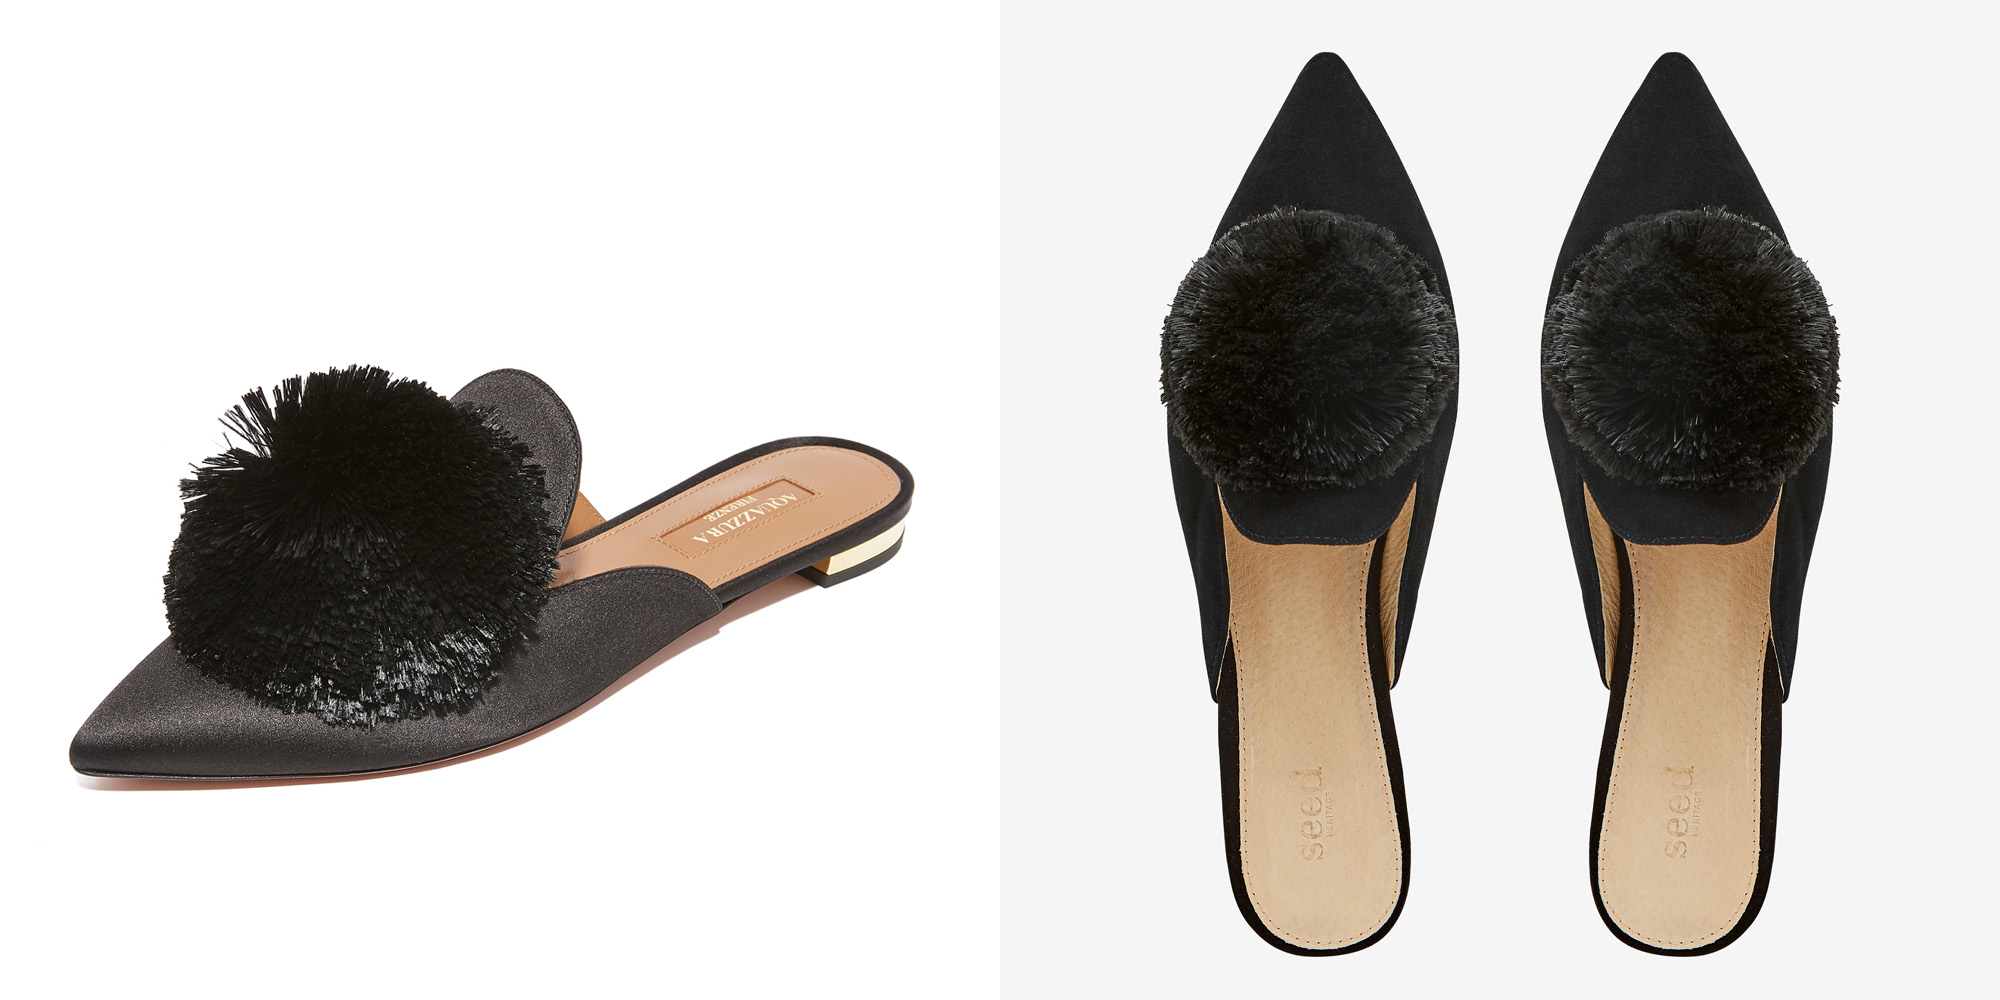 designer shoe dupes luxe look for less